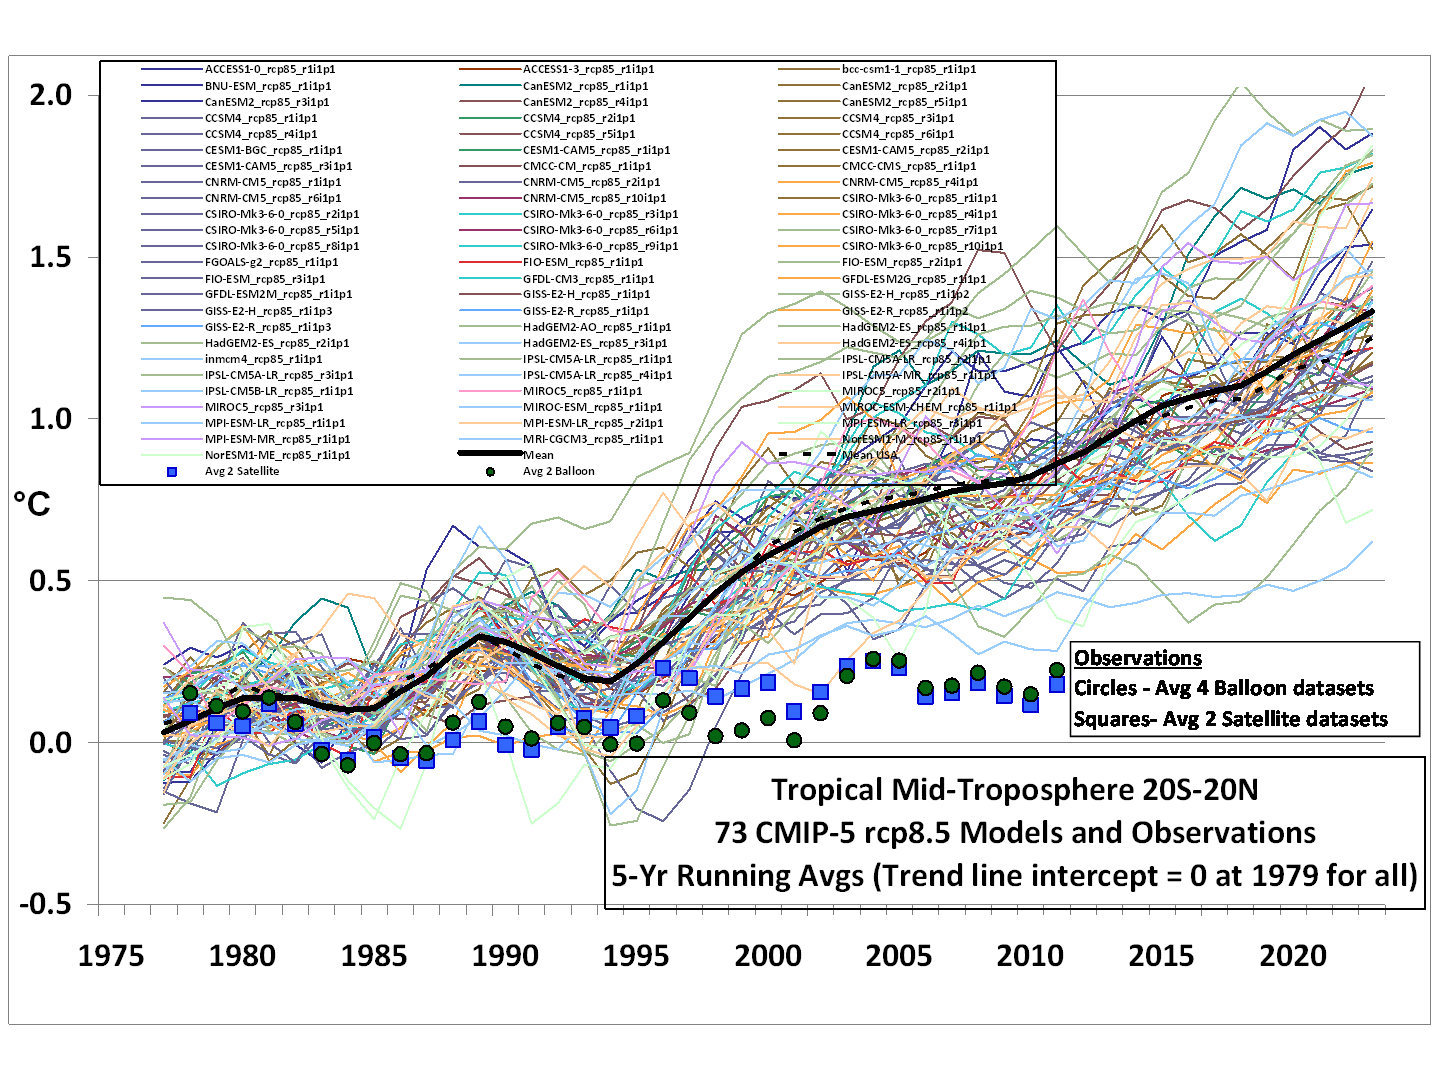 http://www.drroyspencer.com/wp-content/uploads/CMIP5-73-models-vs-obs-20N-20S-MT-5-yr-means1.png